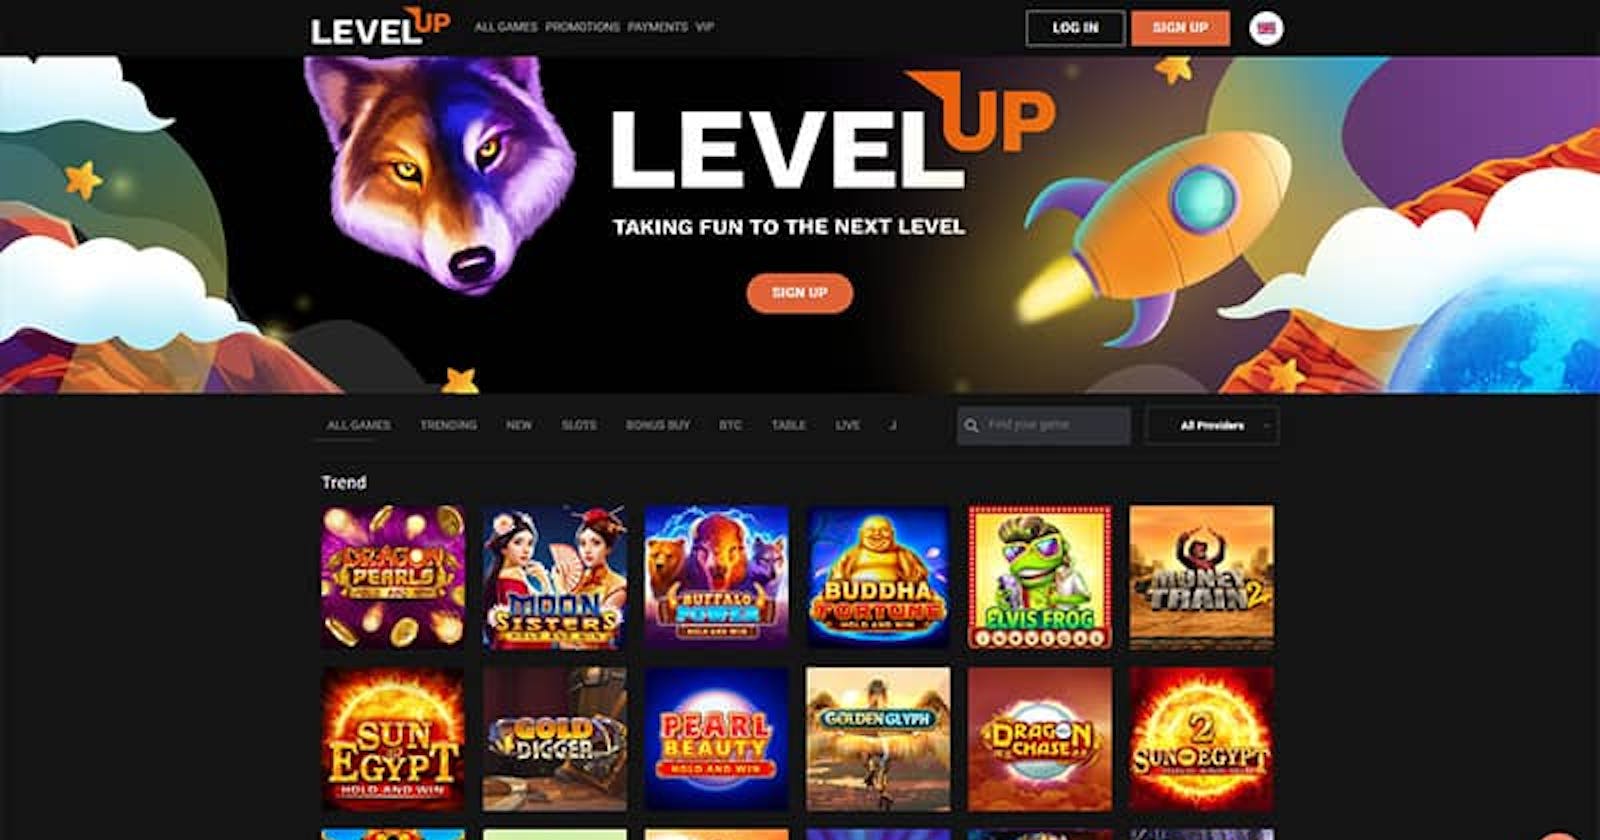 Join our Level Up online casino for your chance to win special jackpots